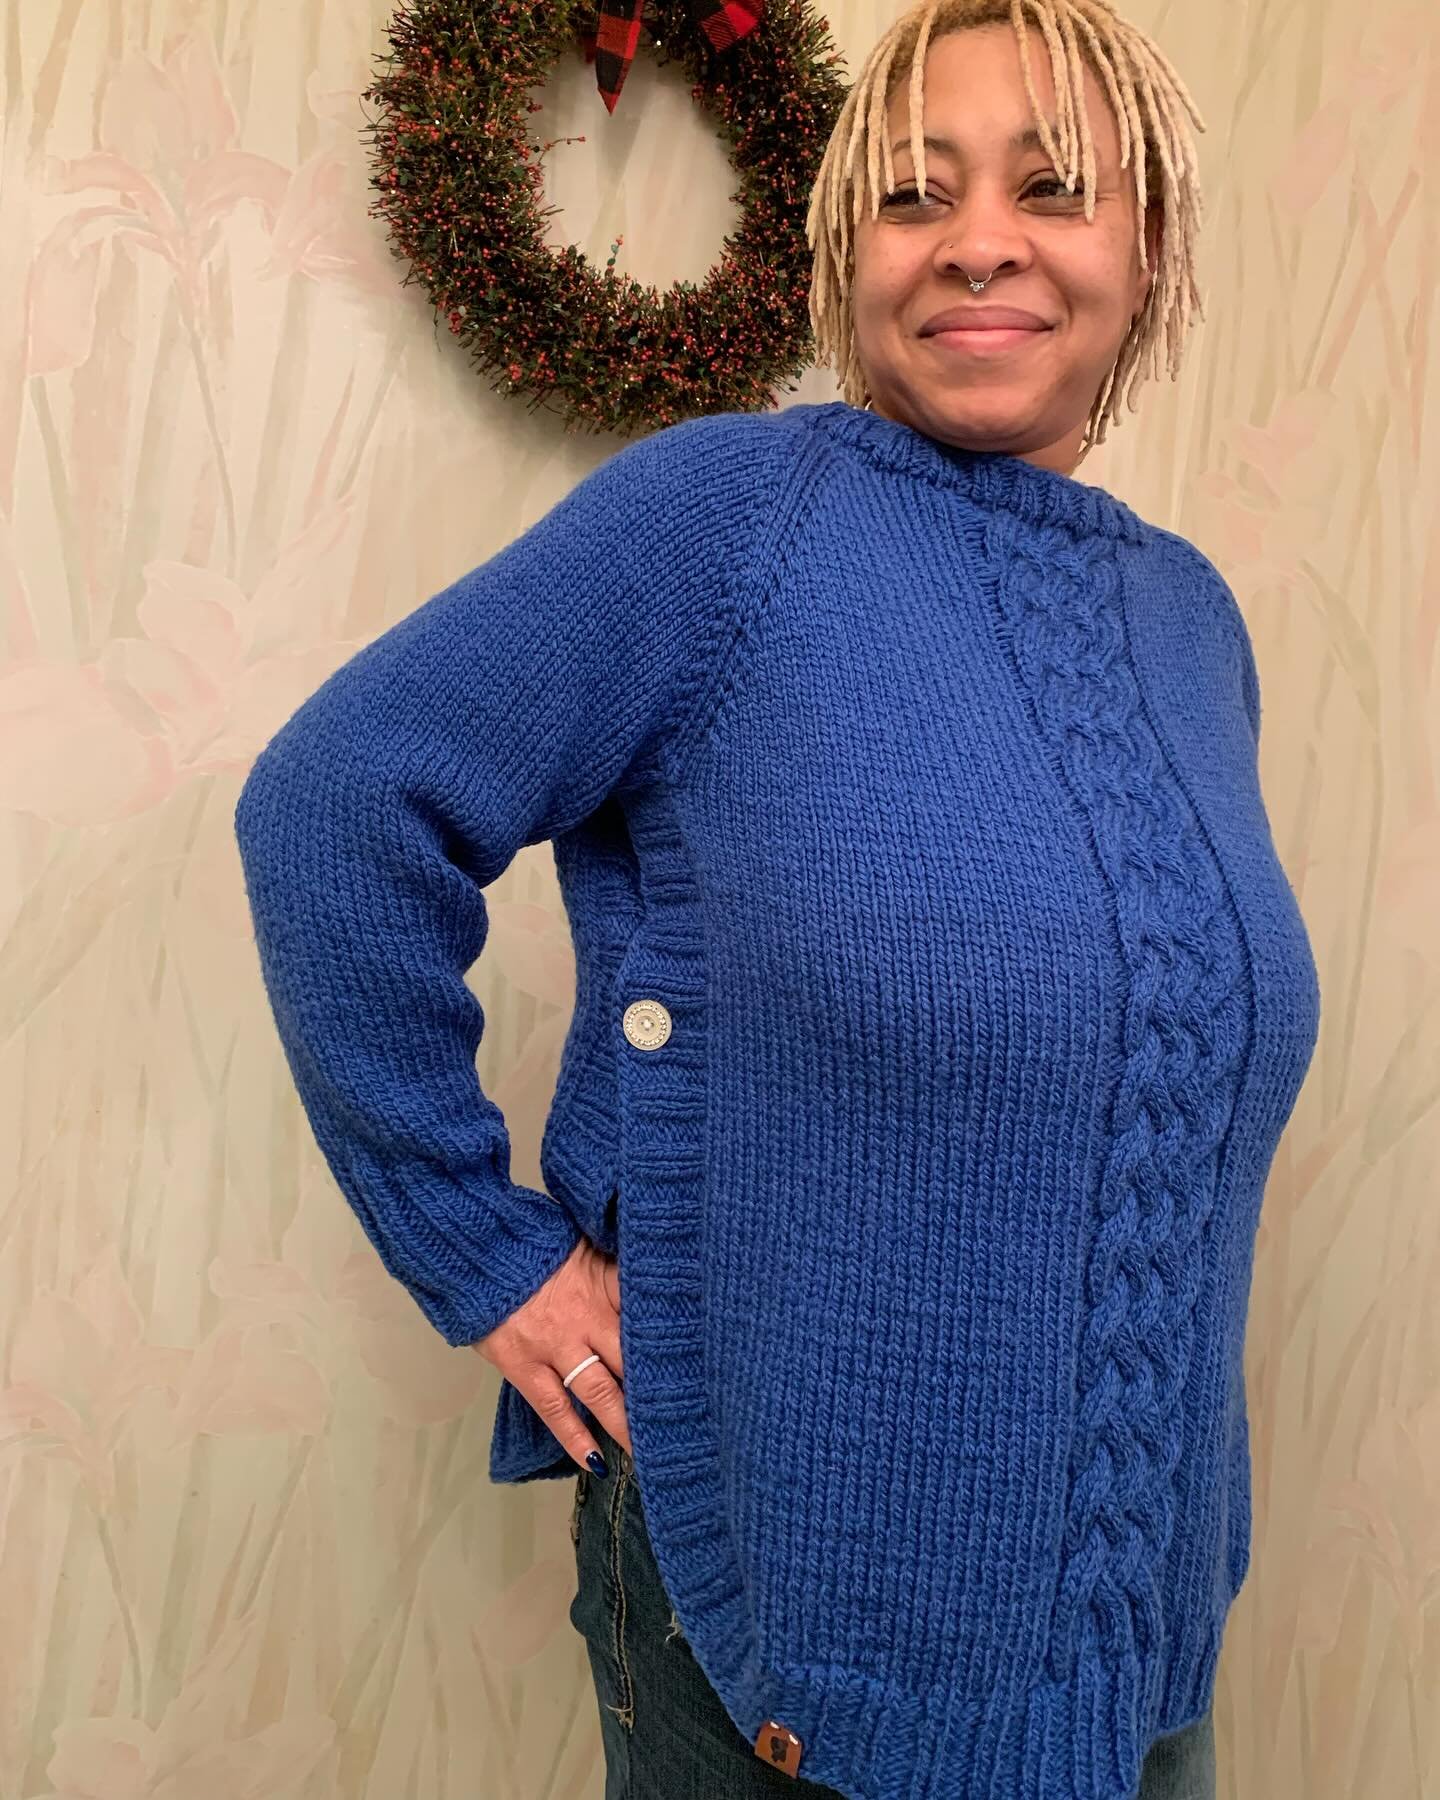 🧶 Fun fact: the first sweater I ever made was for my mom! Shout out to mom for wearing it proudly despite its flaws 🫣 (including that it single-handedly gave her hot flashes 😅). We all start somewhere! Learn about my first sweater and more in my Q